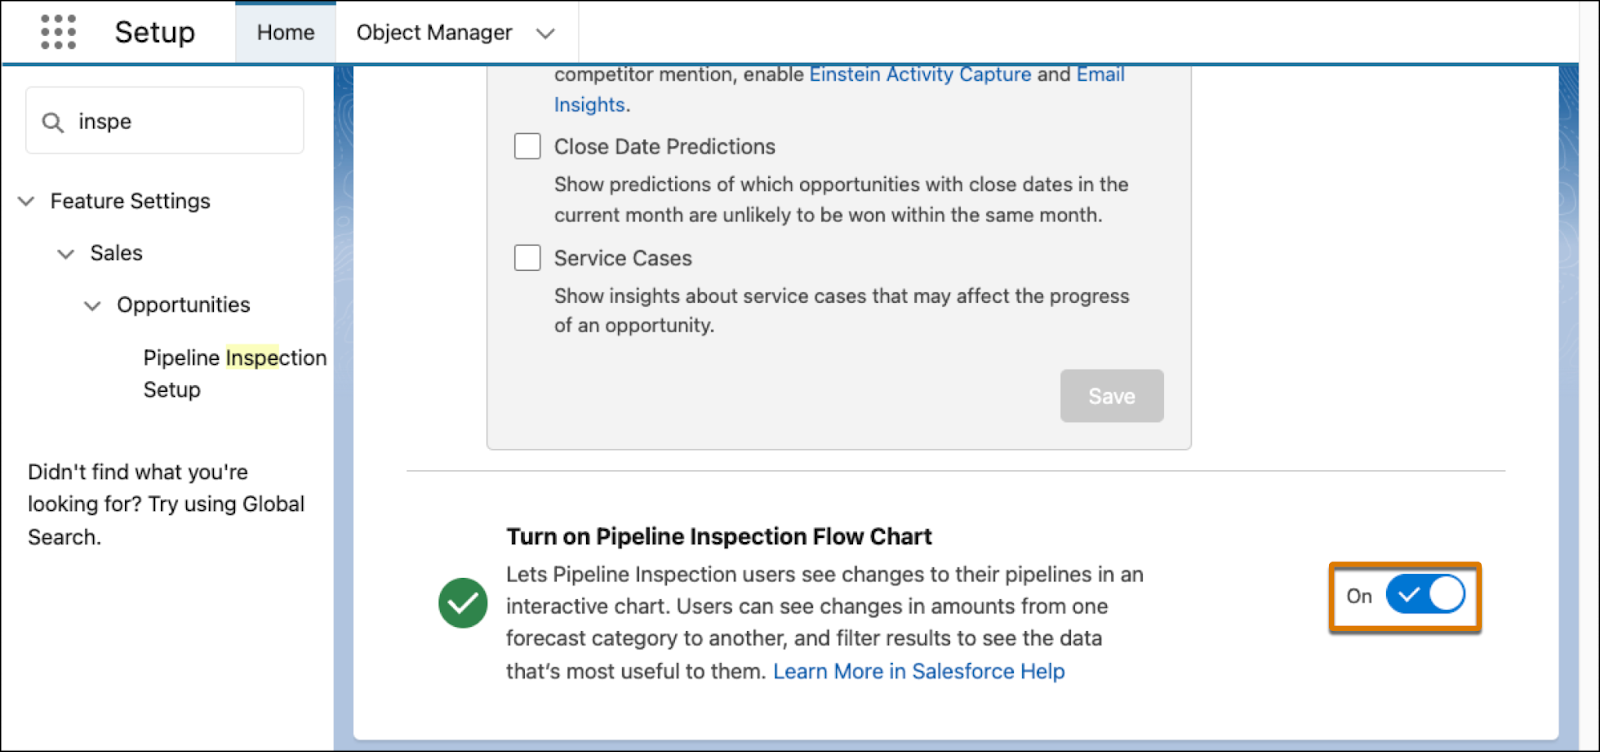 The Pipeline Inspection Setup with the Turn on Pipeline Inspection Flow Chart option on.